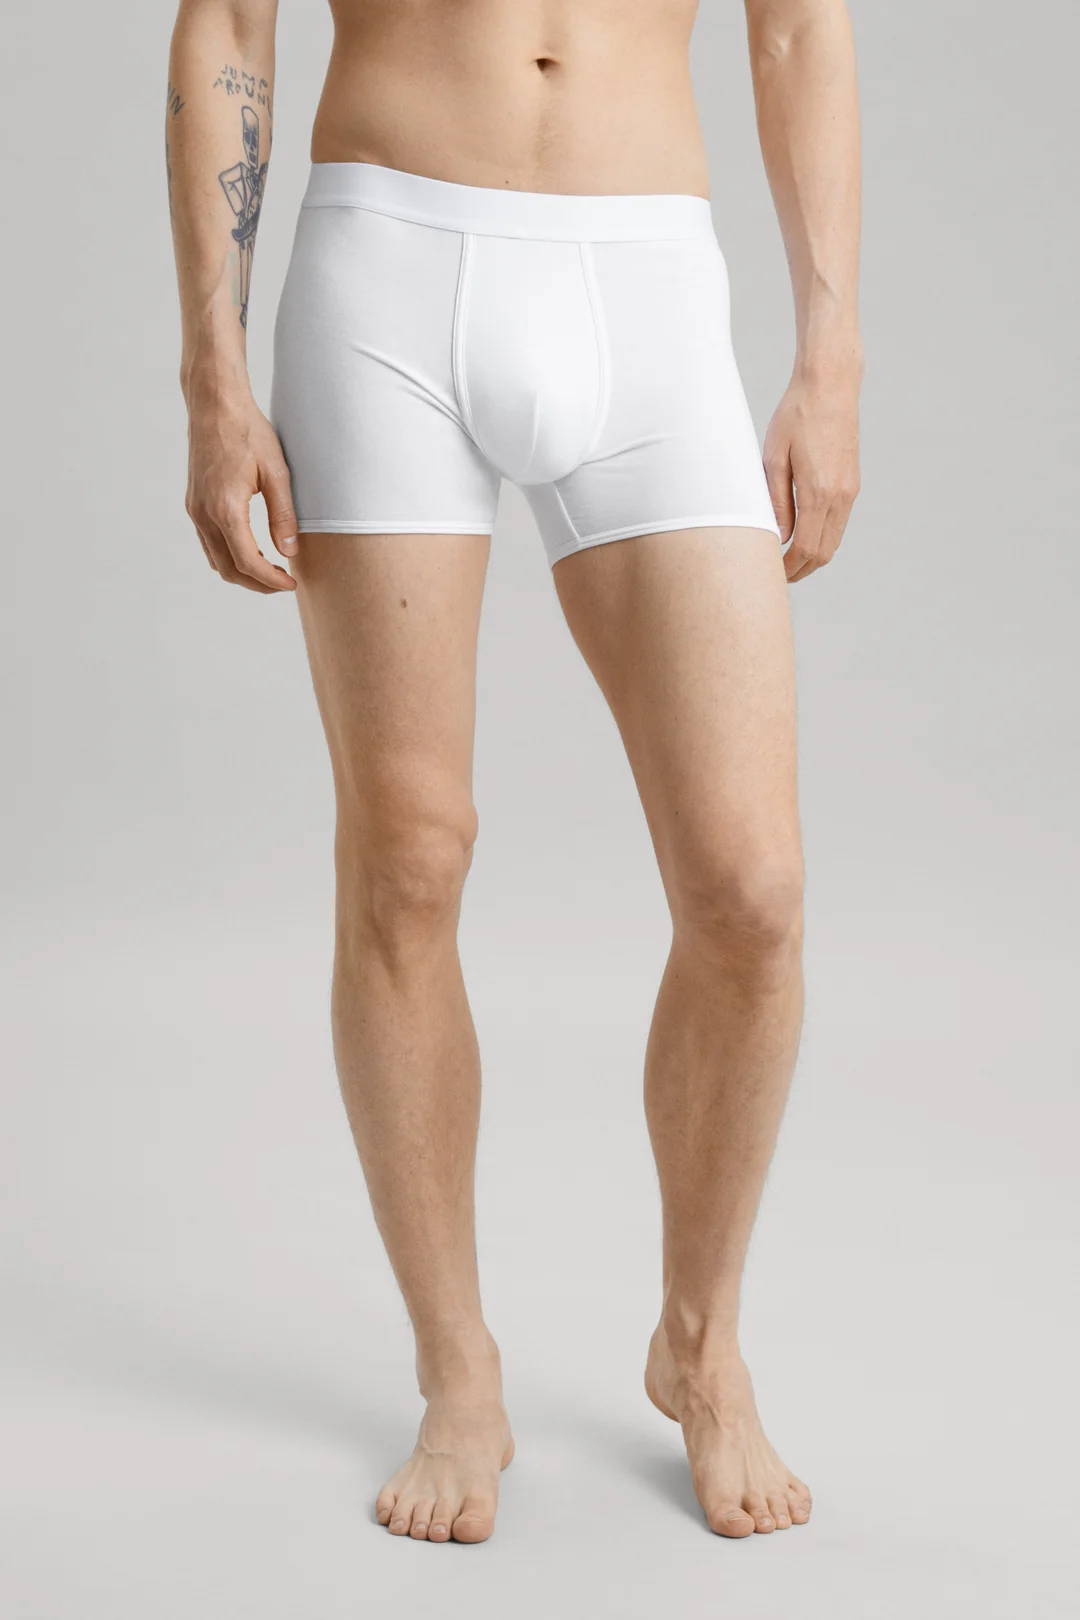 Gender-Neutral Boxers With Pockets - White